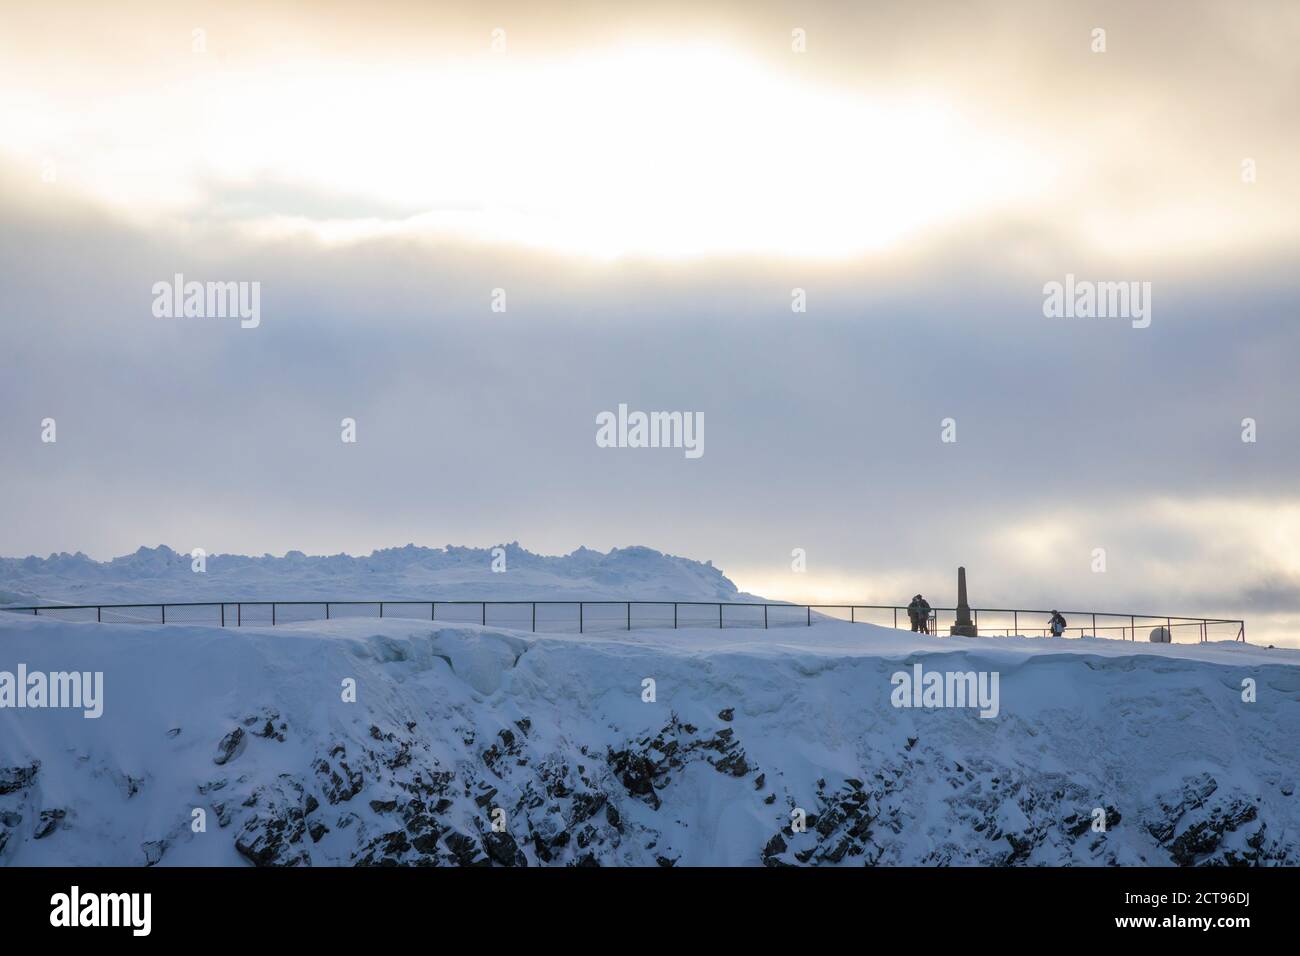 Winter wonderland at the Nordkapp on Magerøya, Norway Stock Photo